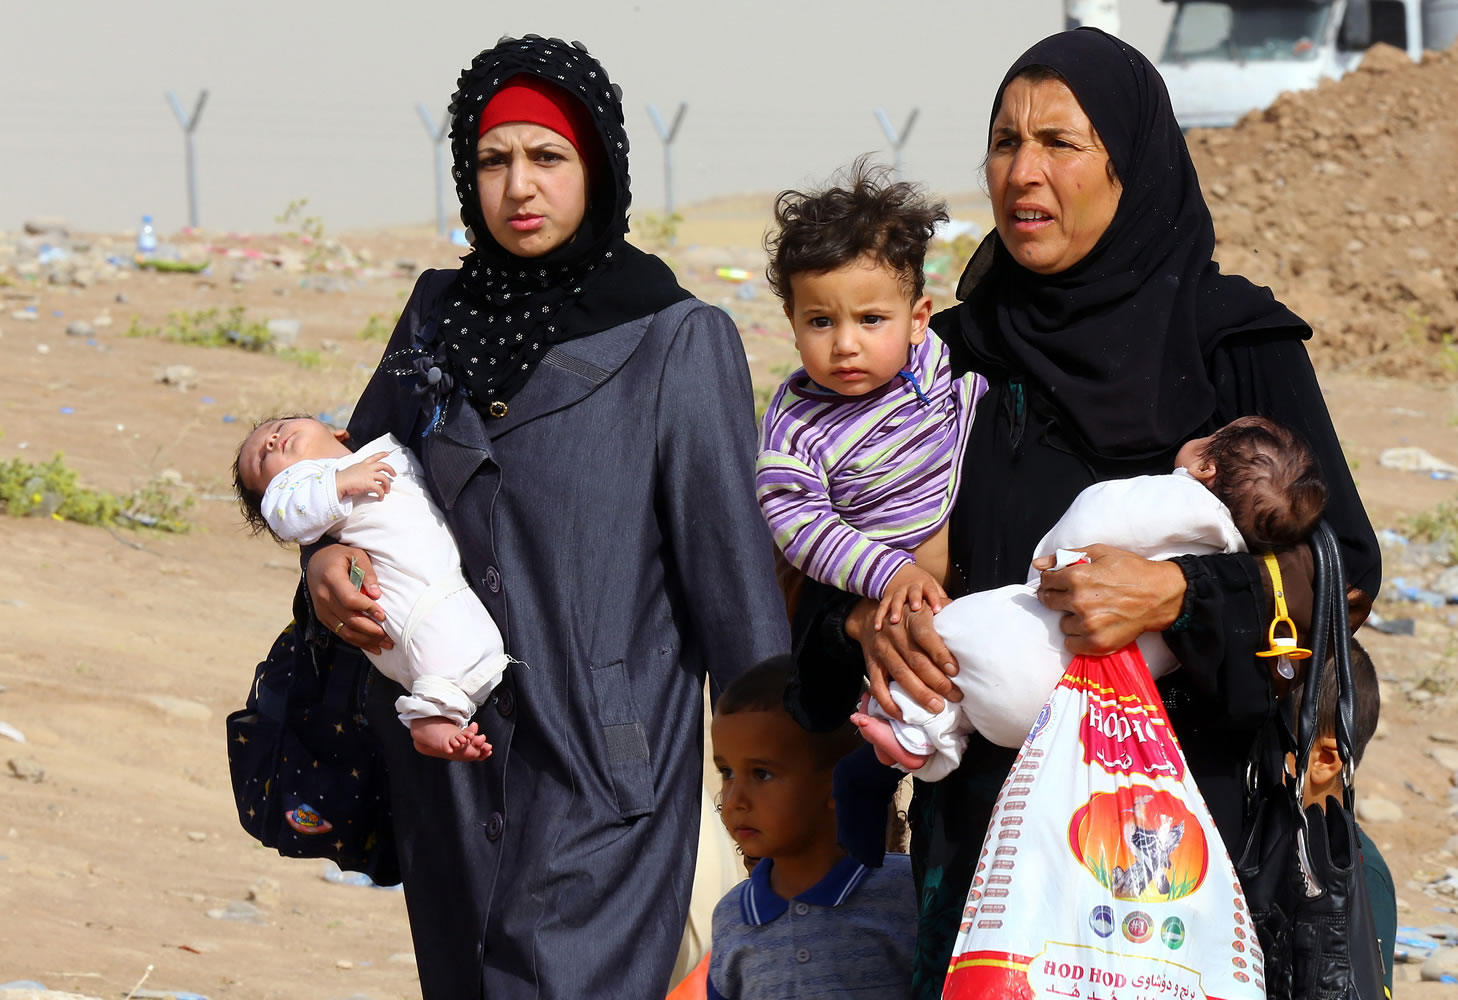 Associated Press
Iraq refugees fleeing from Mosul head to the self-ruled northern Kurdish region Thursday in Irbil, Iraq, 217 miles north of Baghdad. An estimated half a million residents fled Mosul, an economically important city.